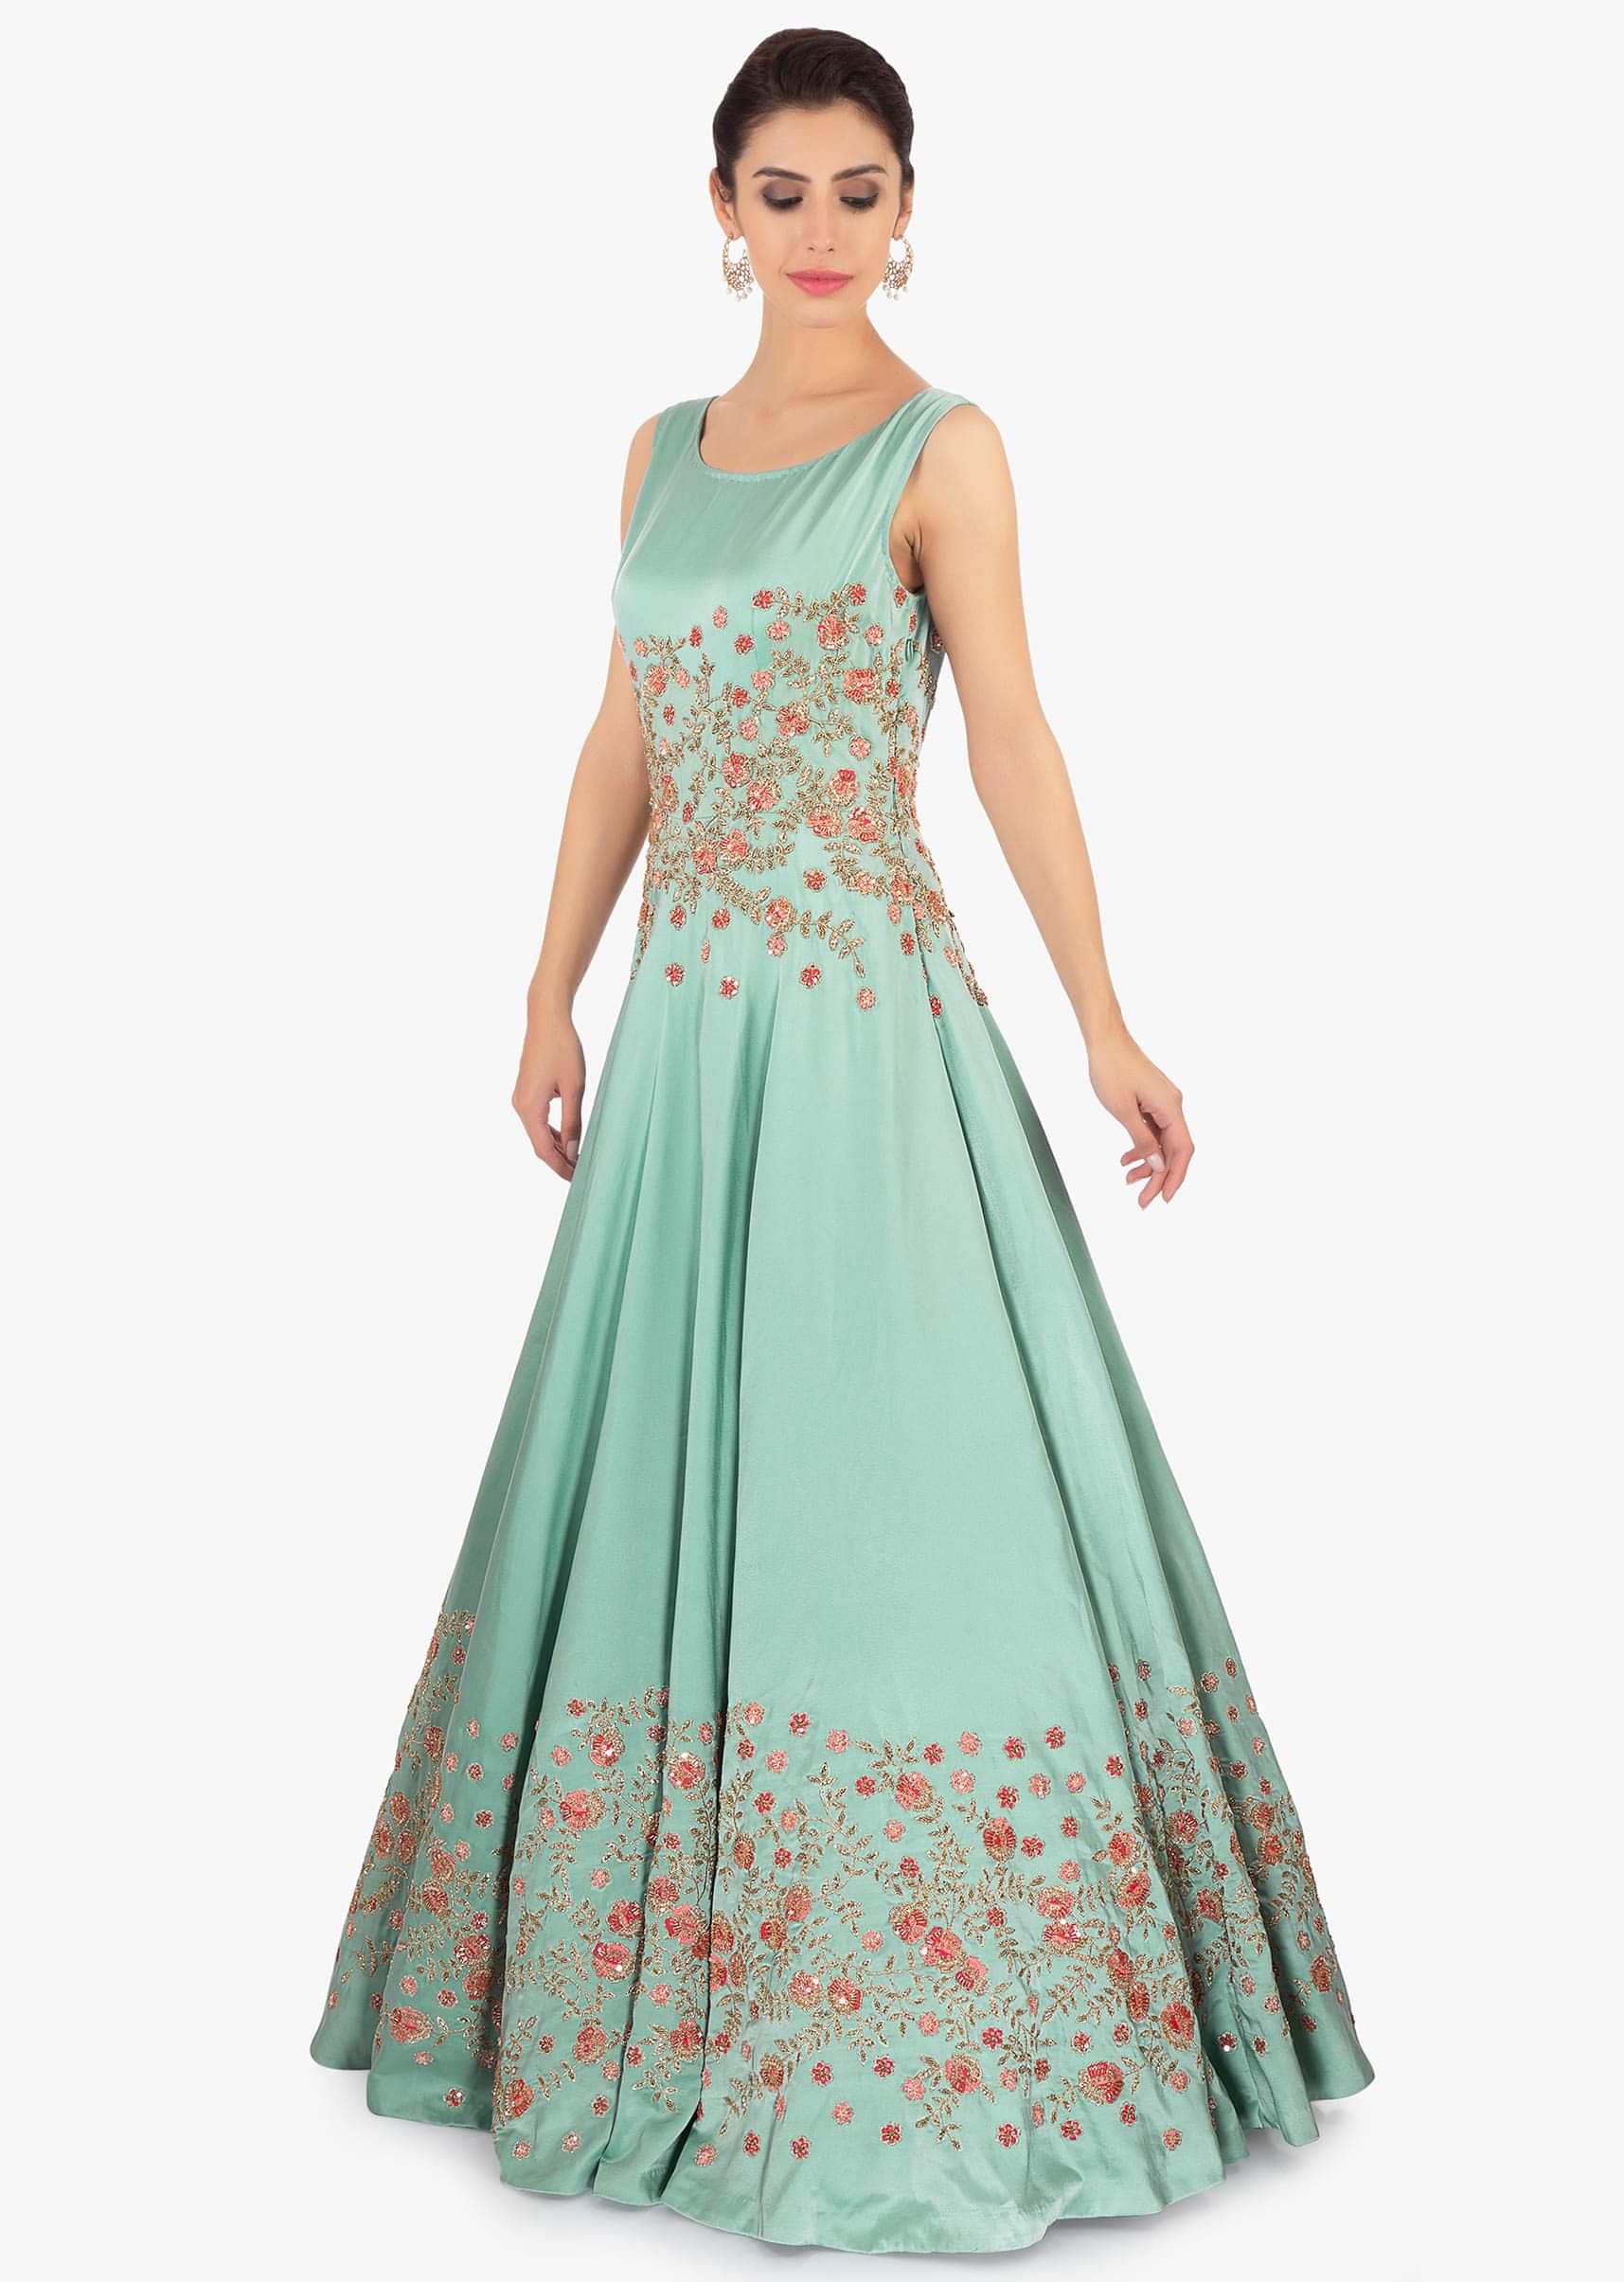 Tiffany blue satin gown in zari and resham floral embroidery